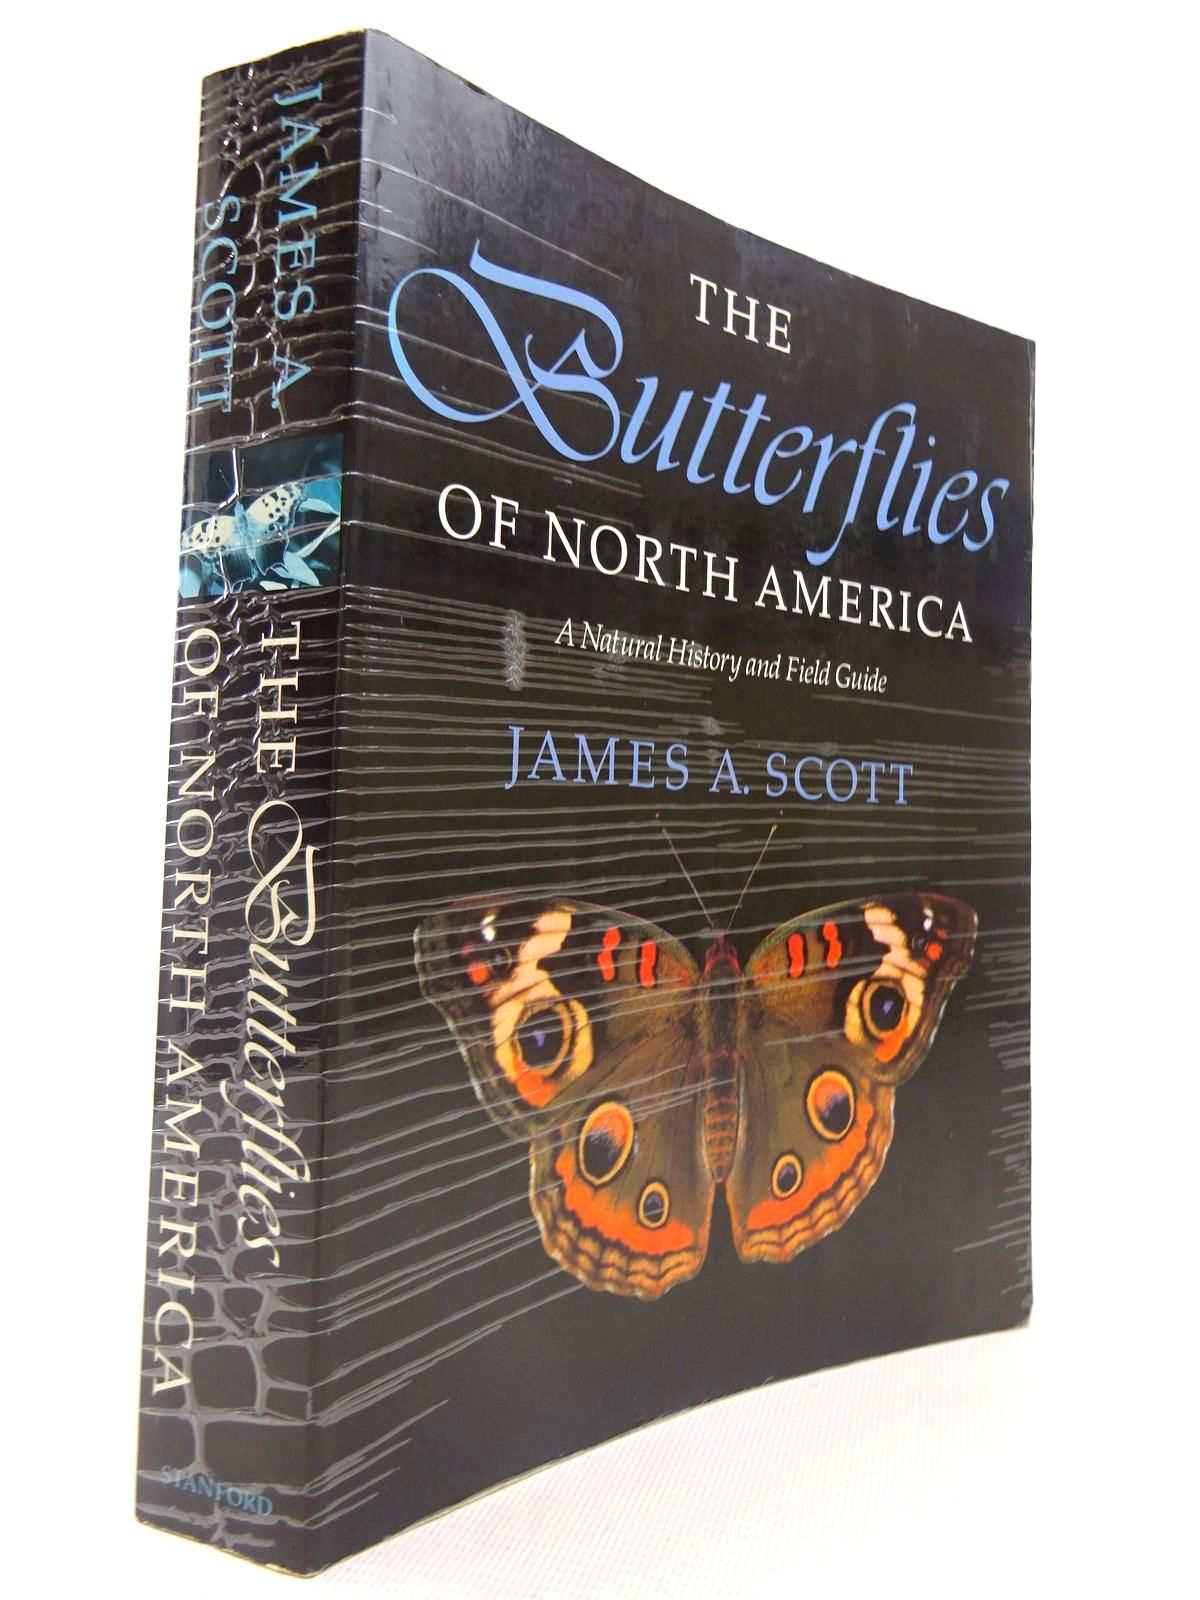 Photo of THE BUTTERFLIES OF NORTH AMERICA: A NATURAL HISTORY AND FIELD GUIDE written by Scott, James A. published by Stanford University Press (STOCK CODE: 1816664)  for sale by Stella & Rose's Books